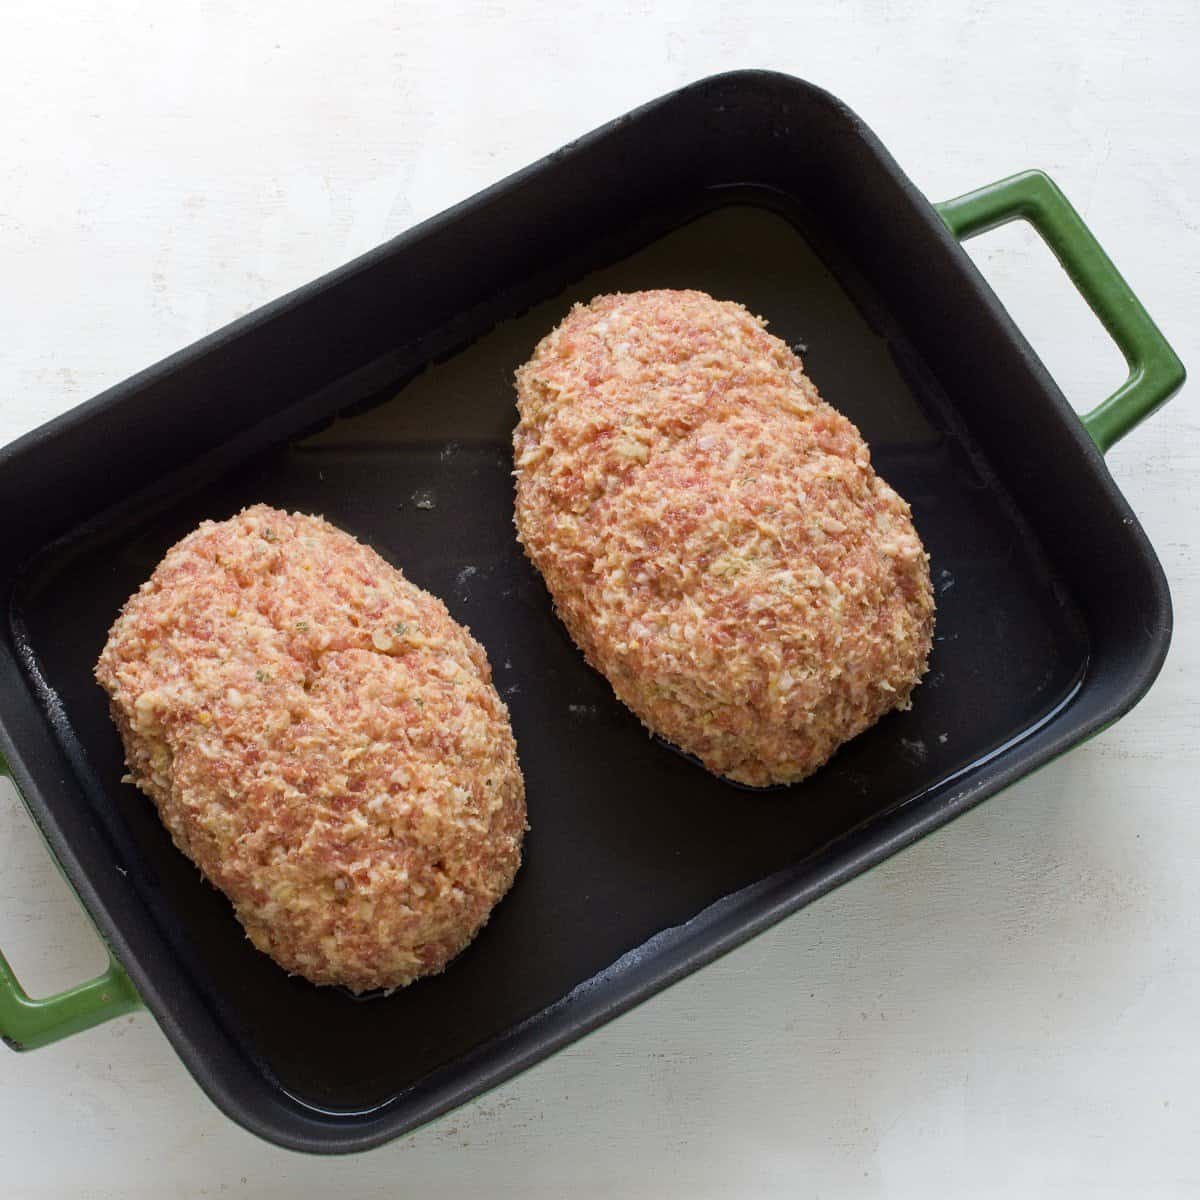 Two pork meatloaves in a baking dish before baking.